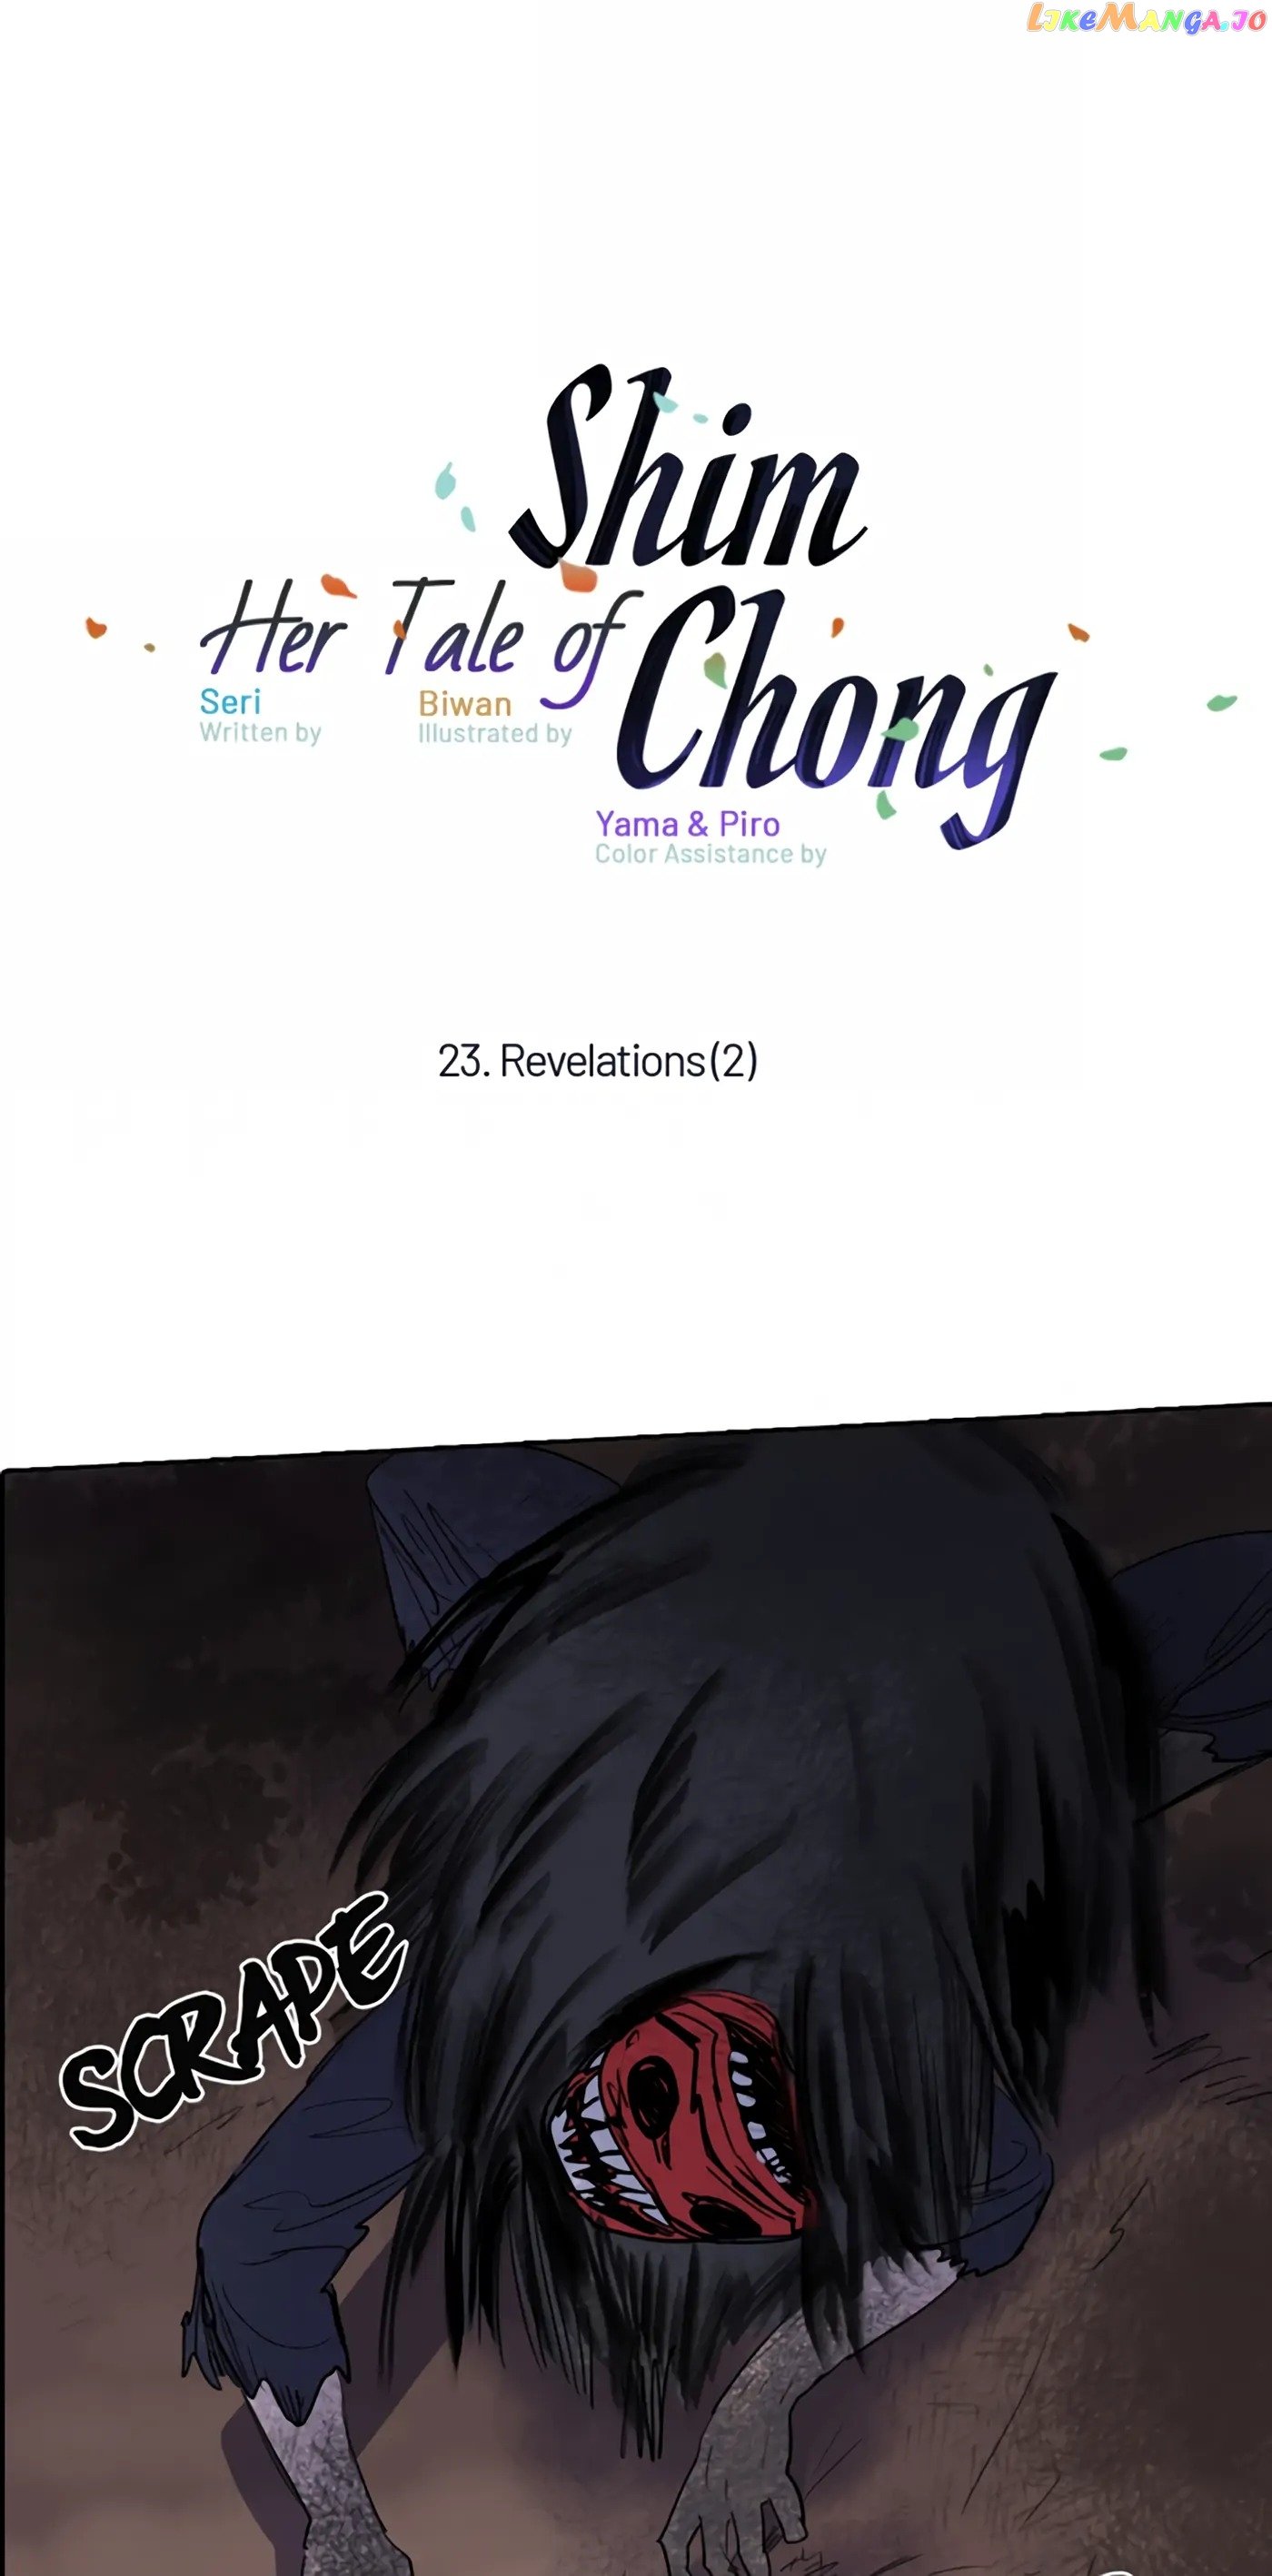 Her Tale of Shim Chong - chapter 23 - #1